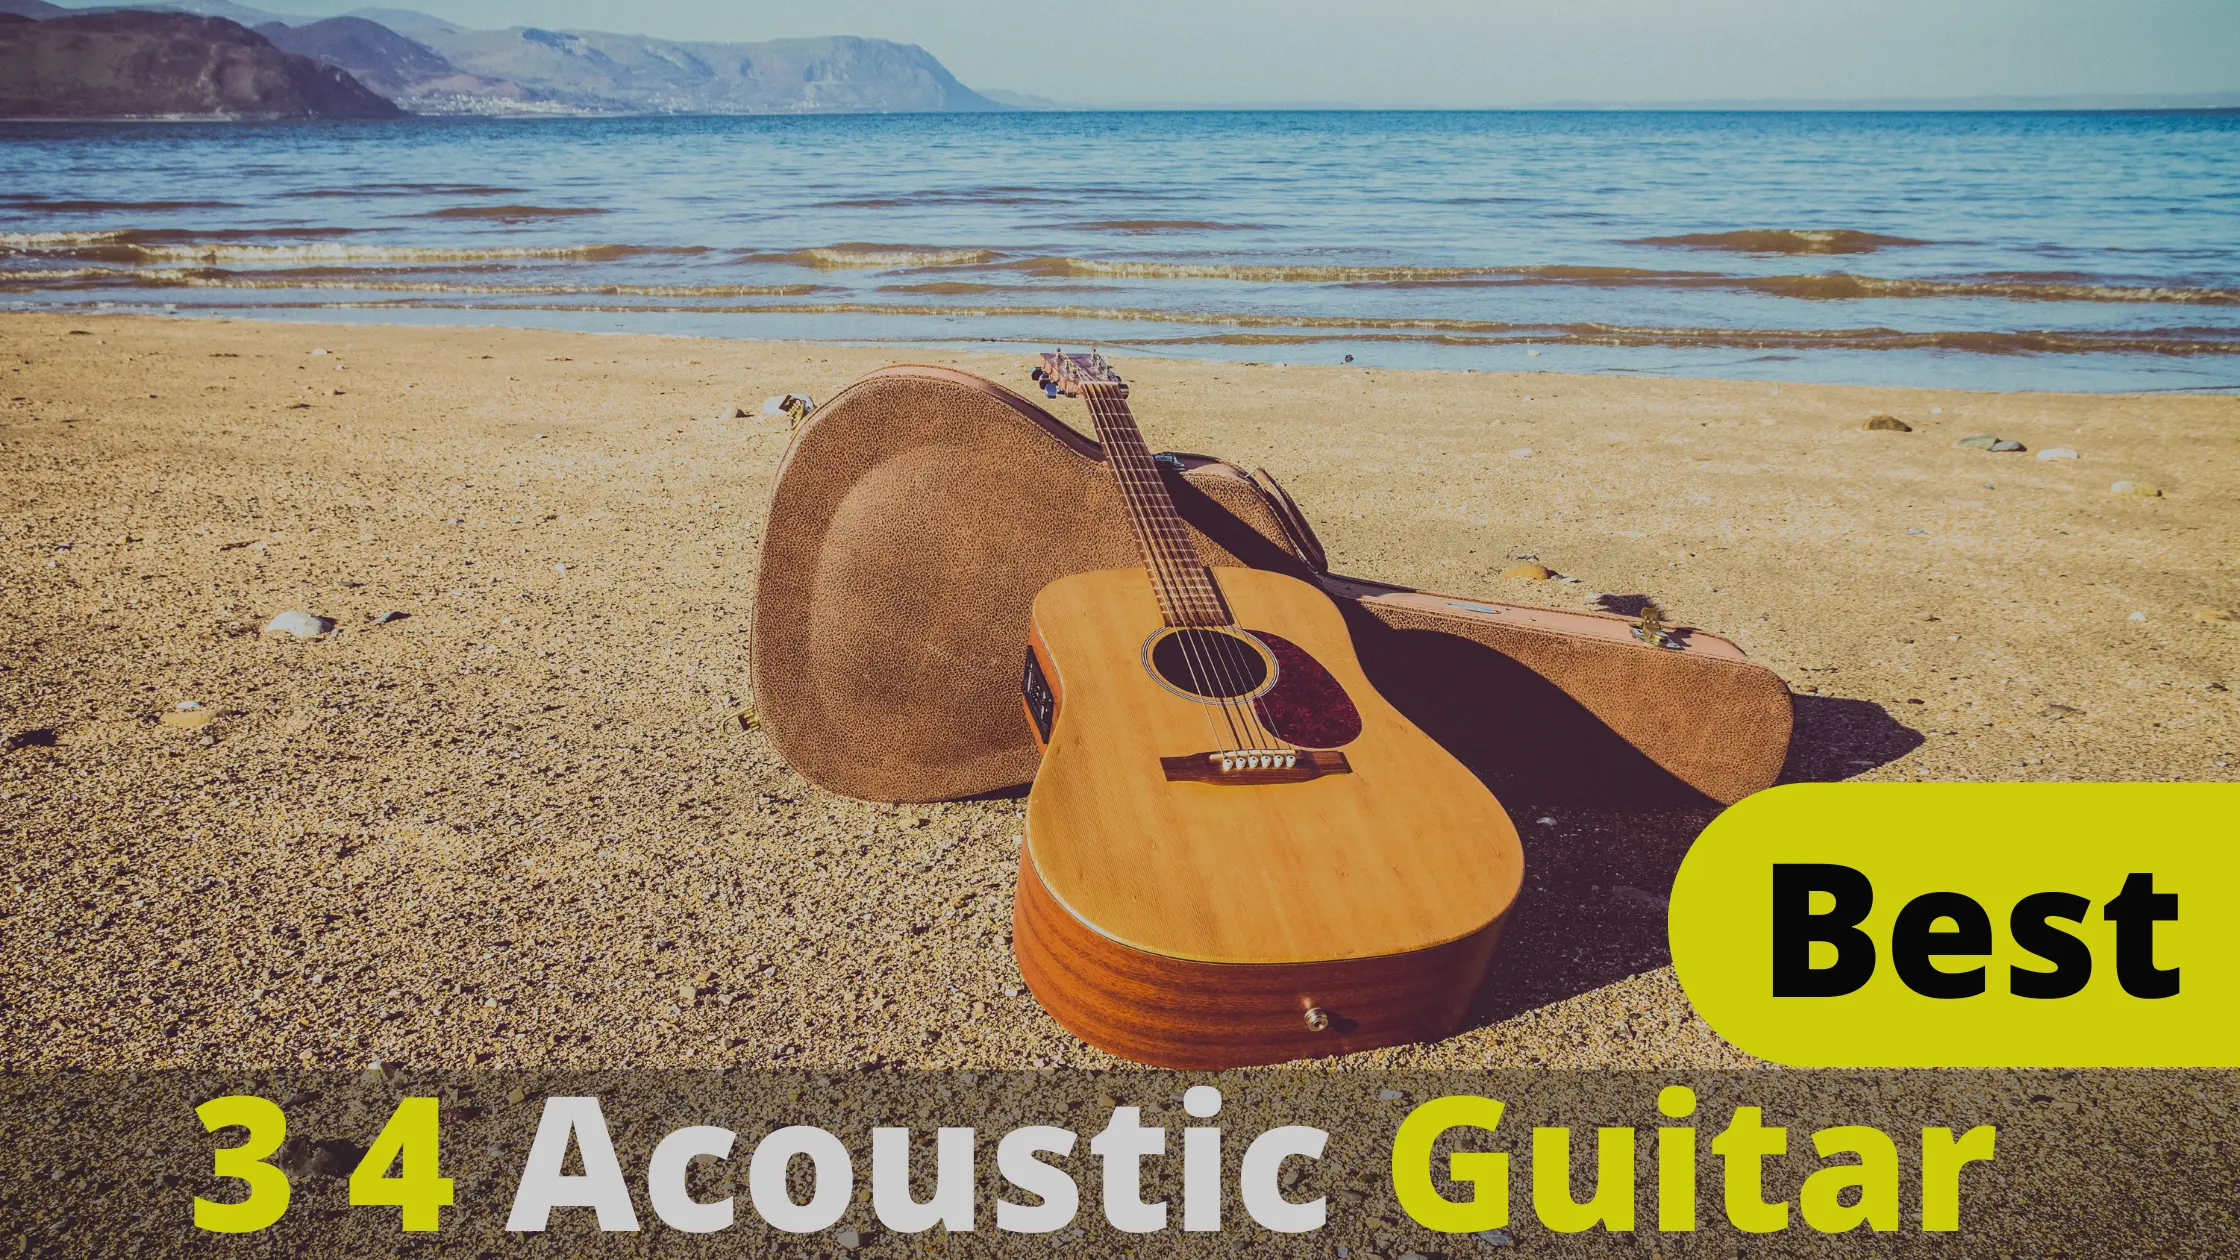 Top 10 Best 3 4 Acoustic Guitar - Complete Guide